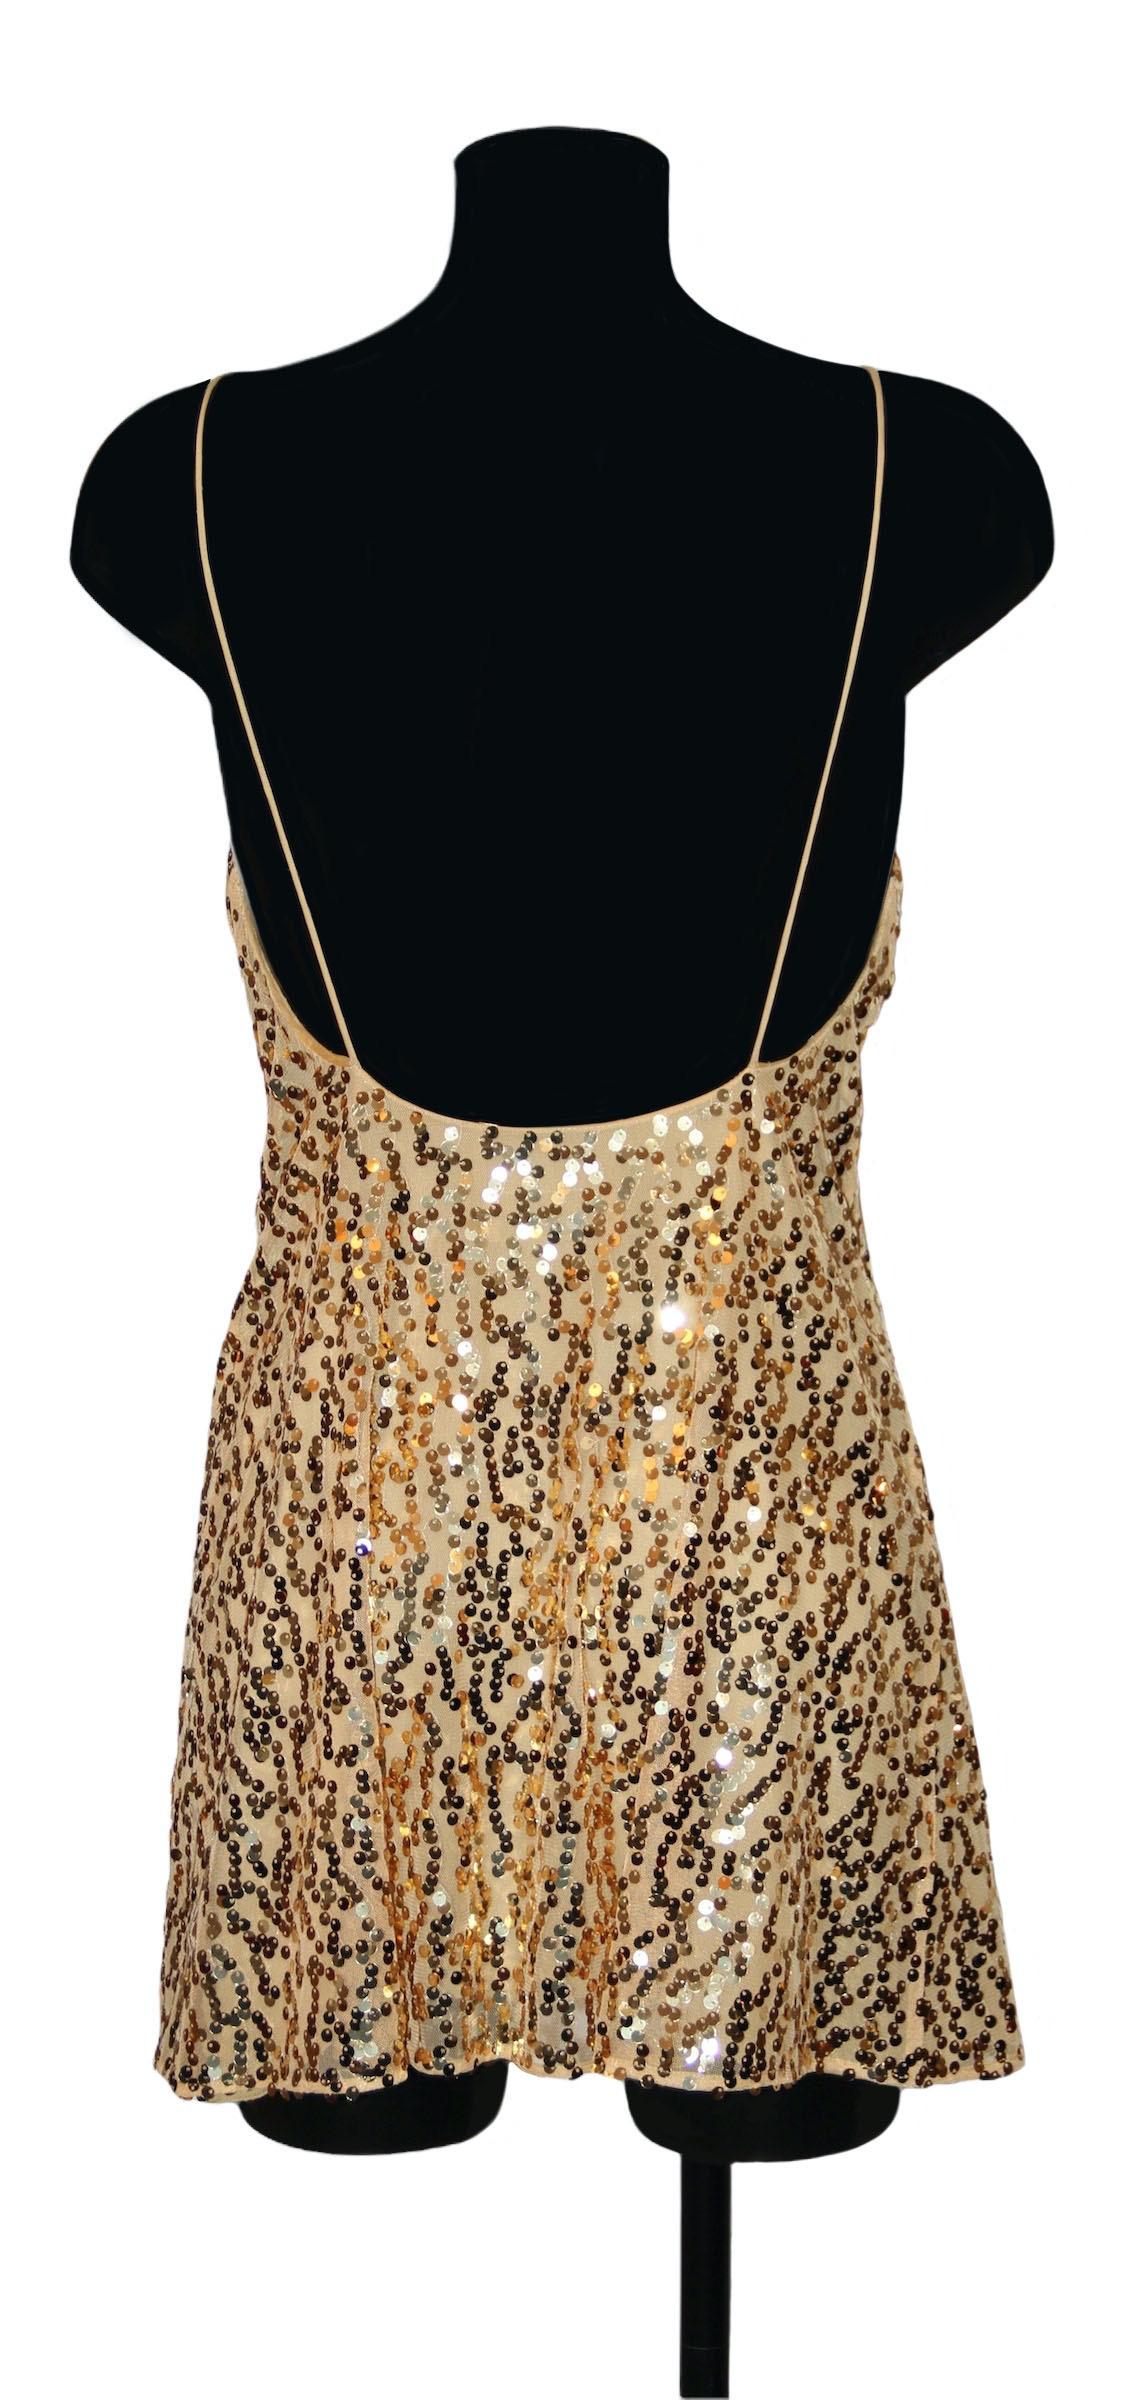 This pre-owned exquisite Saint Laurent mini dress in gold sequins was part of the 2016 Spring Collection.
It features a v-neckline, low cut back and flowing skirt with criss cross seam at bust line.
Can be worn as a mini dress or a